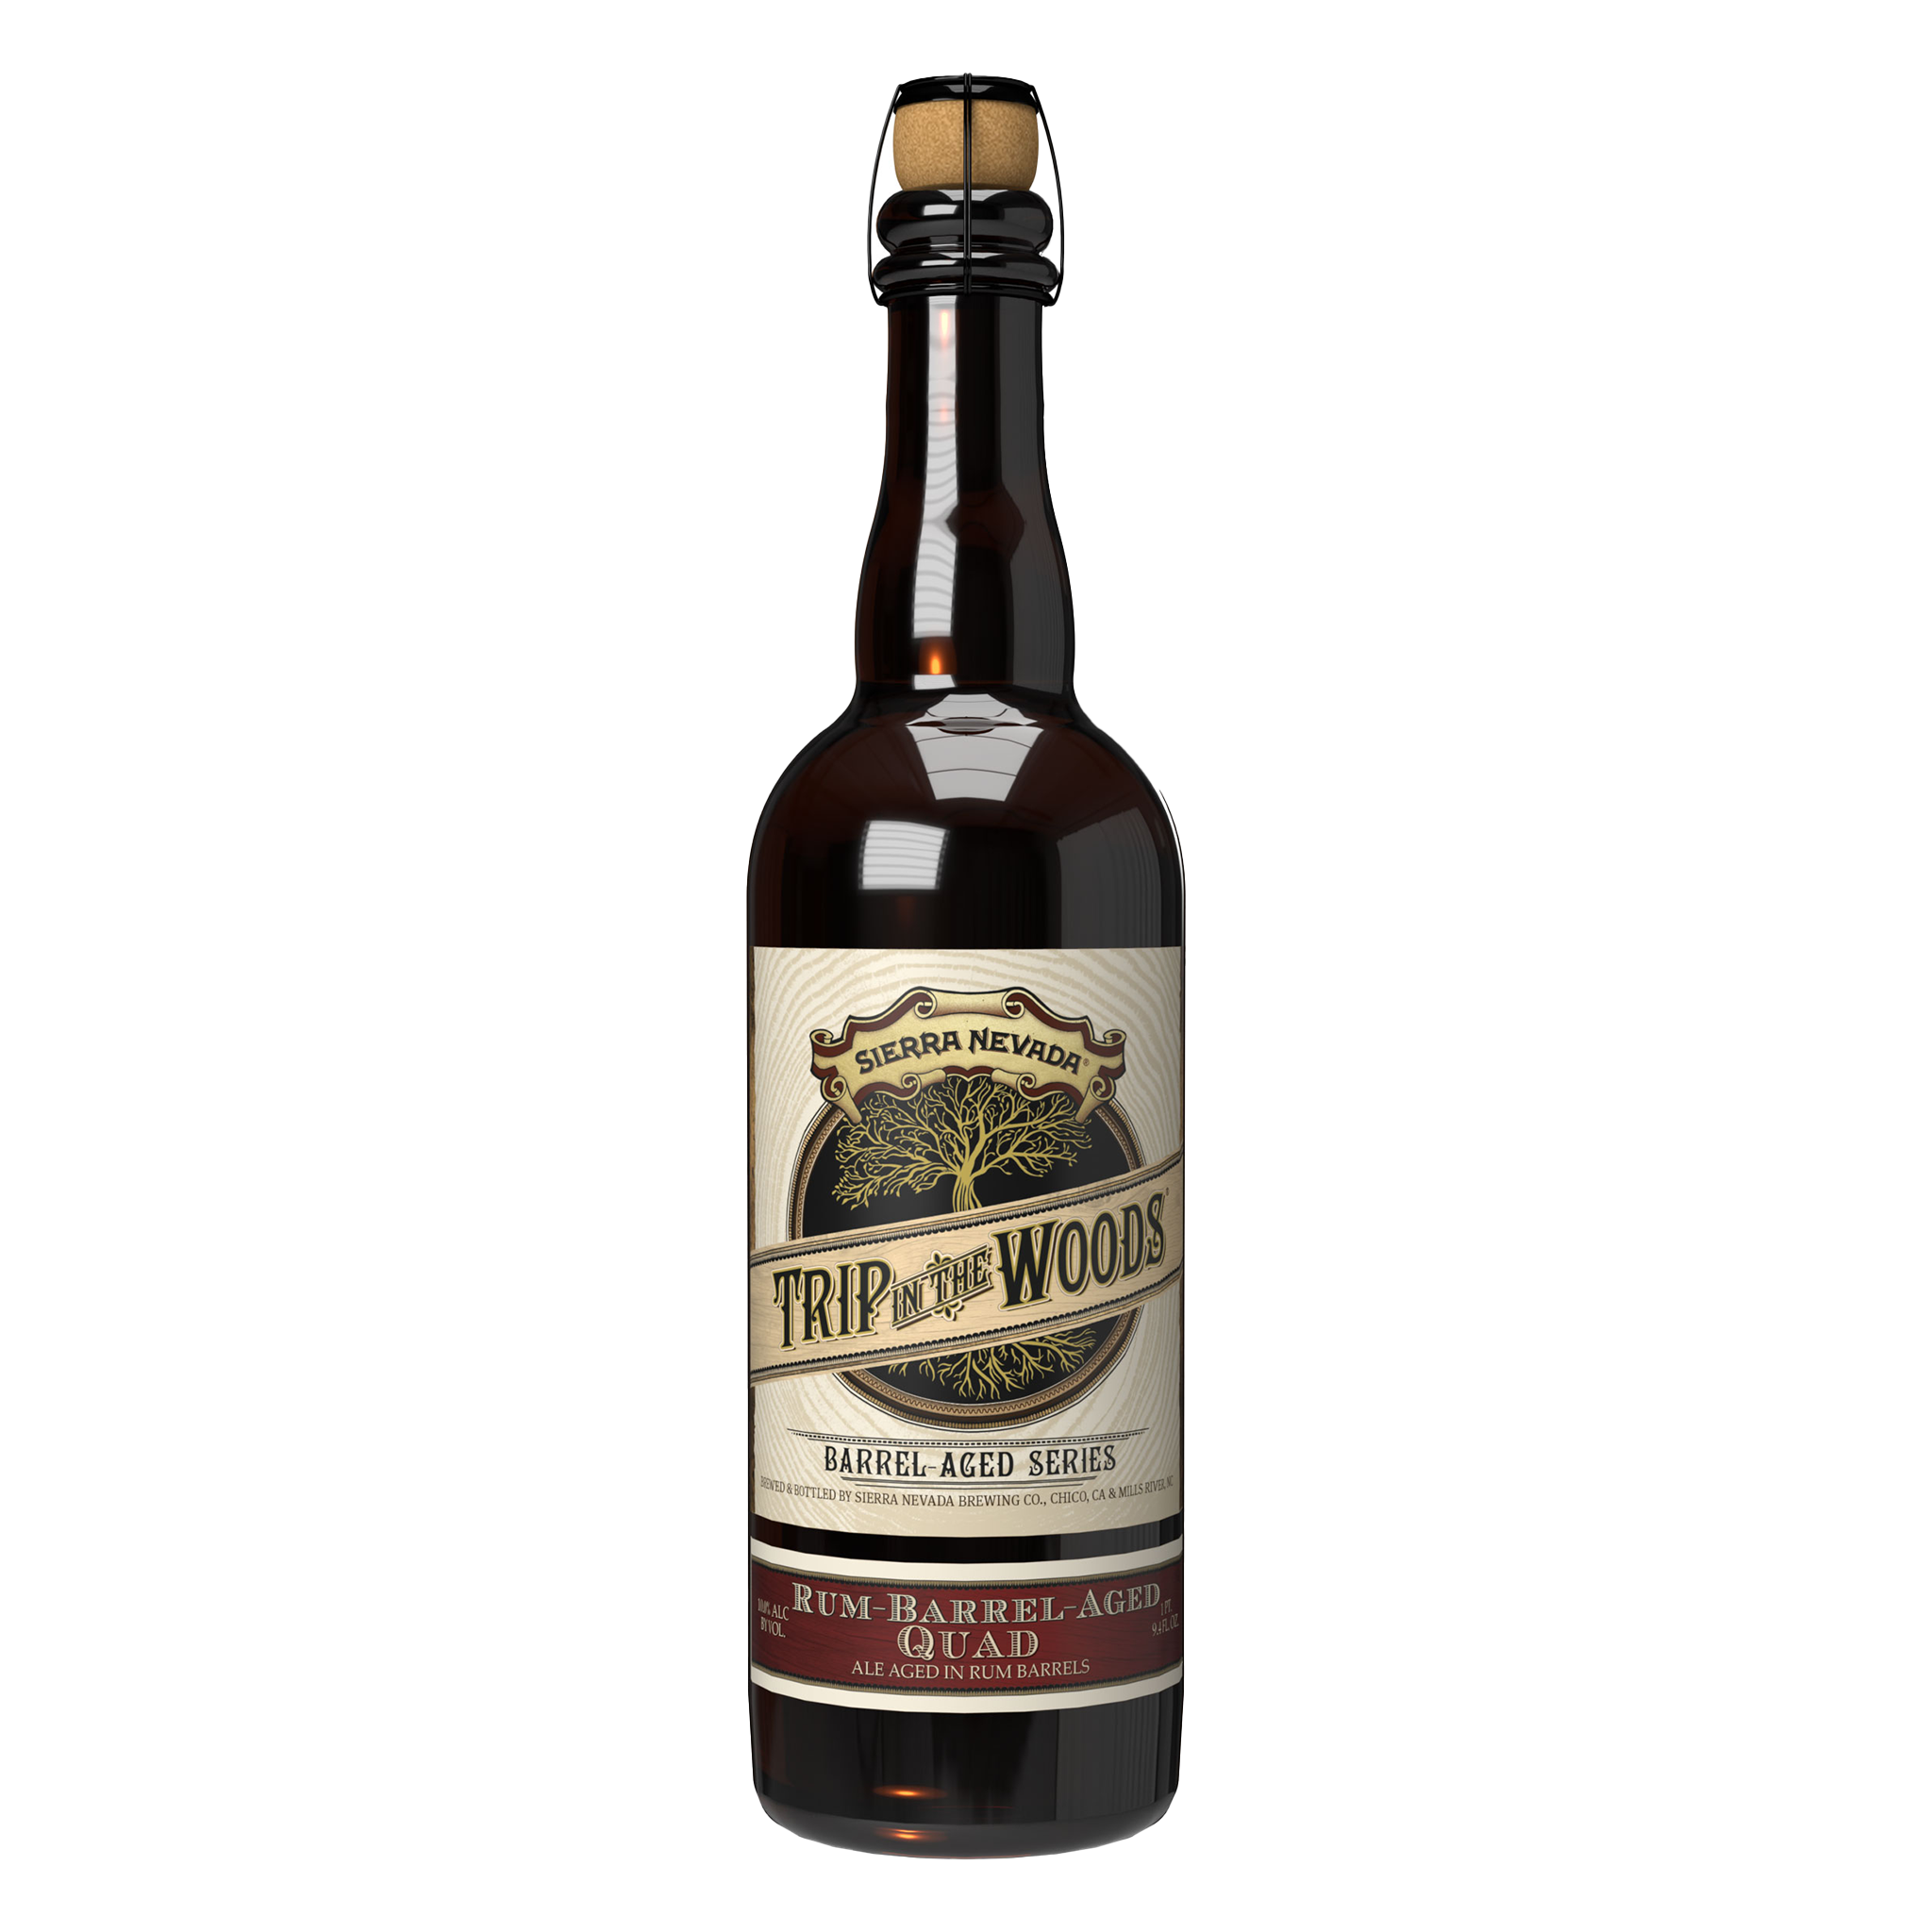 Trip in the Woods Rum Barrel Aged Quad 750 mL bottle